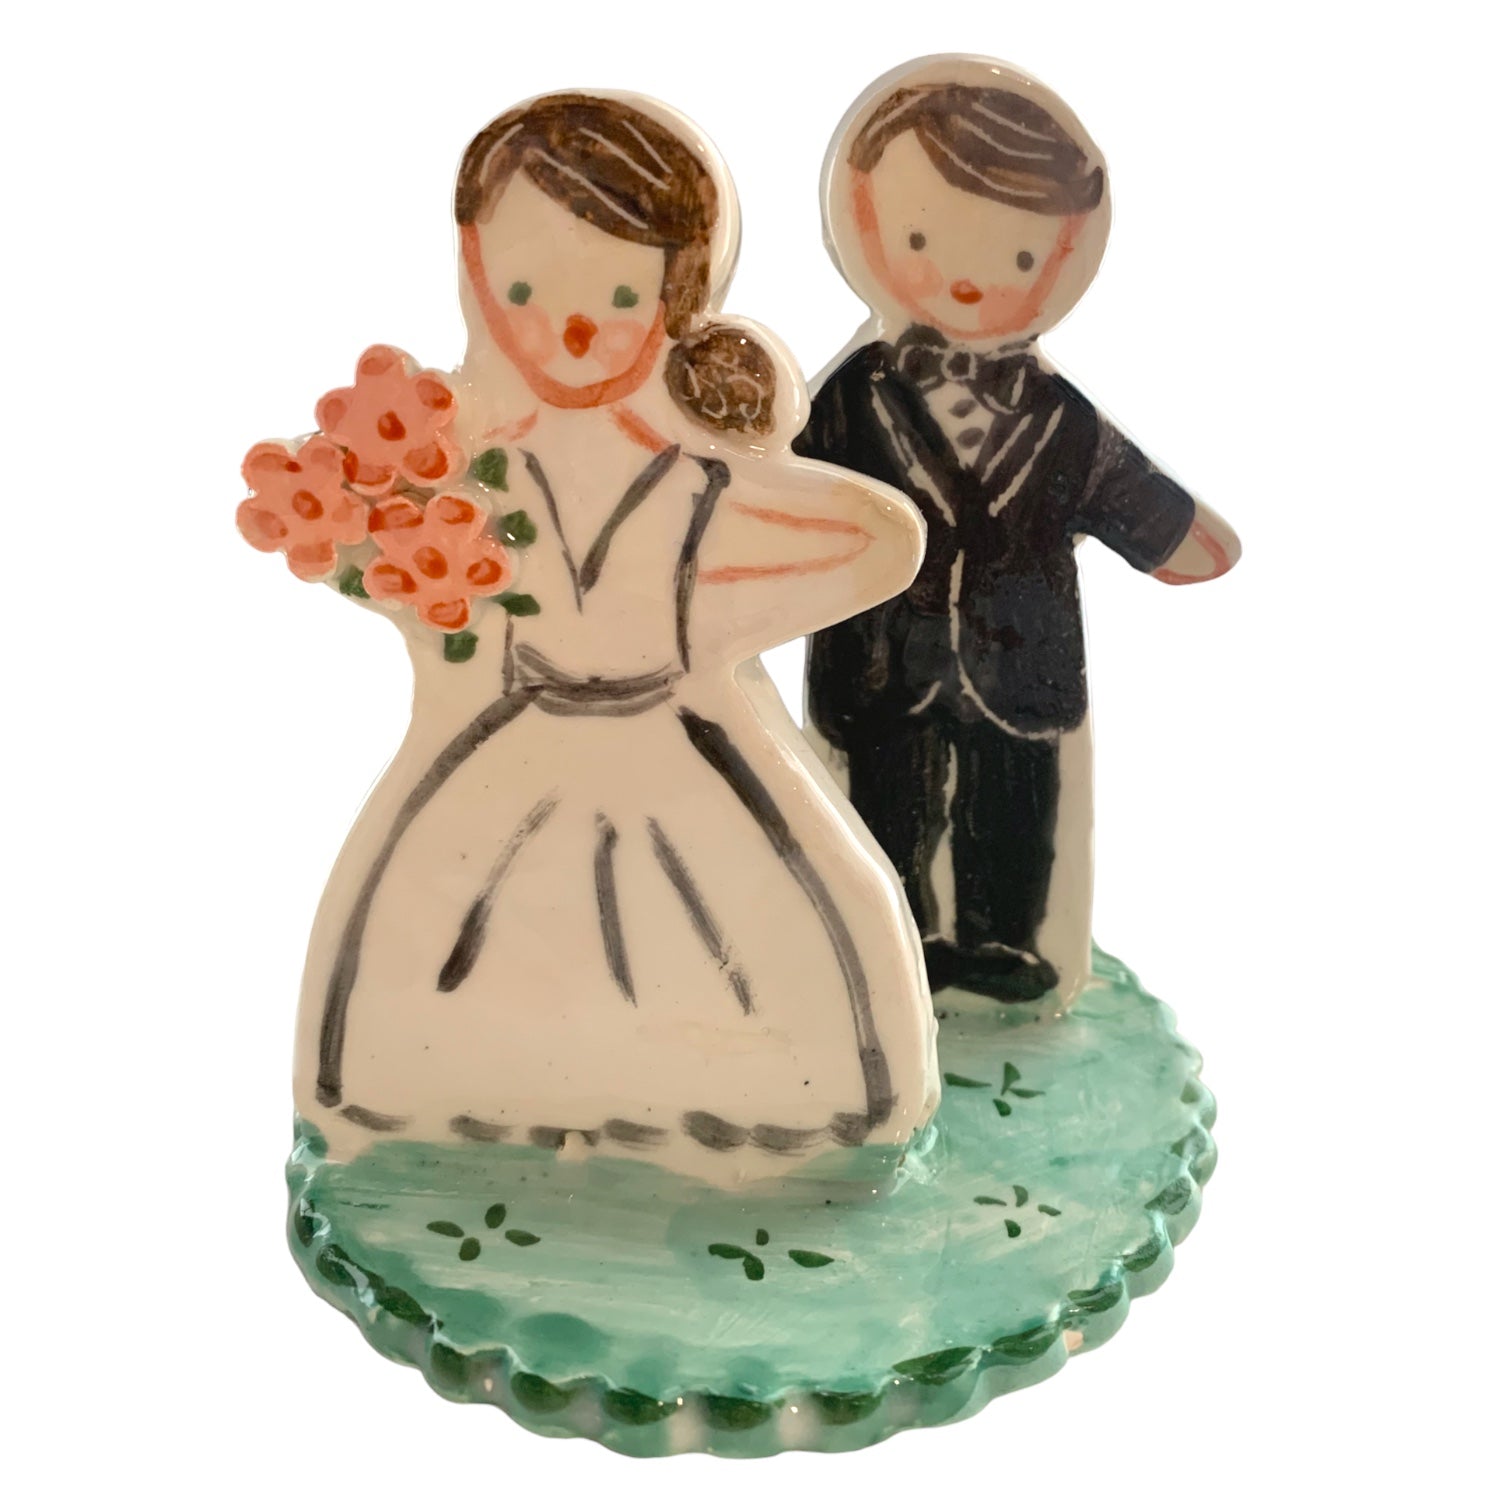 Cake Toppers DELIVERED